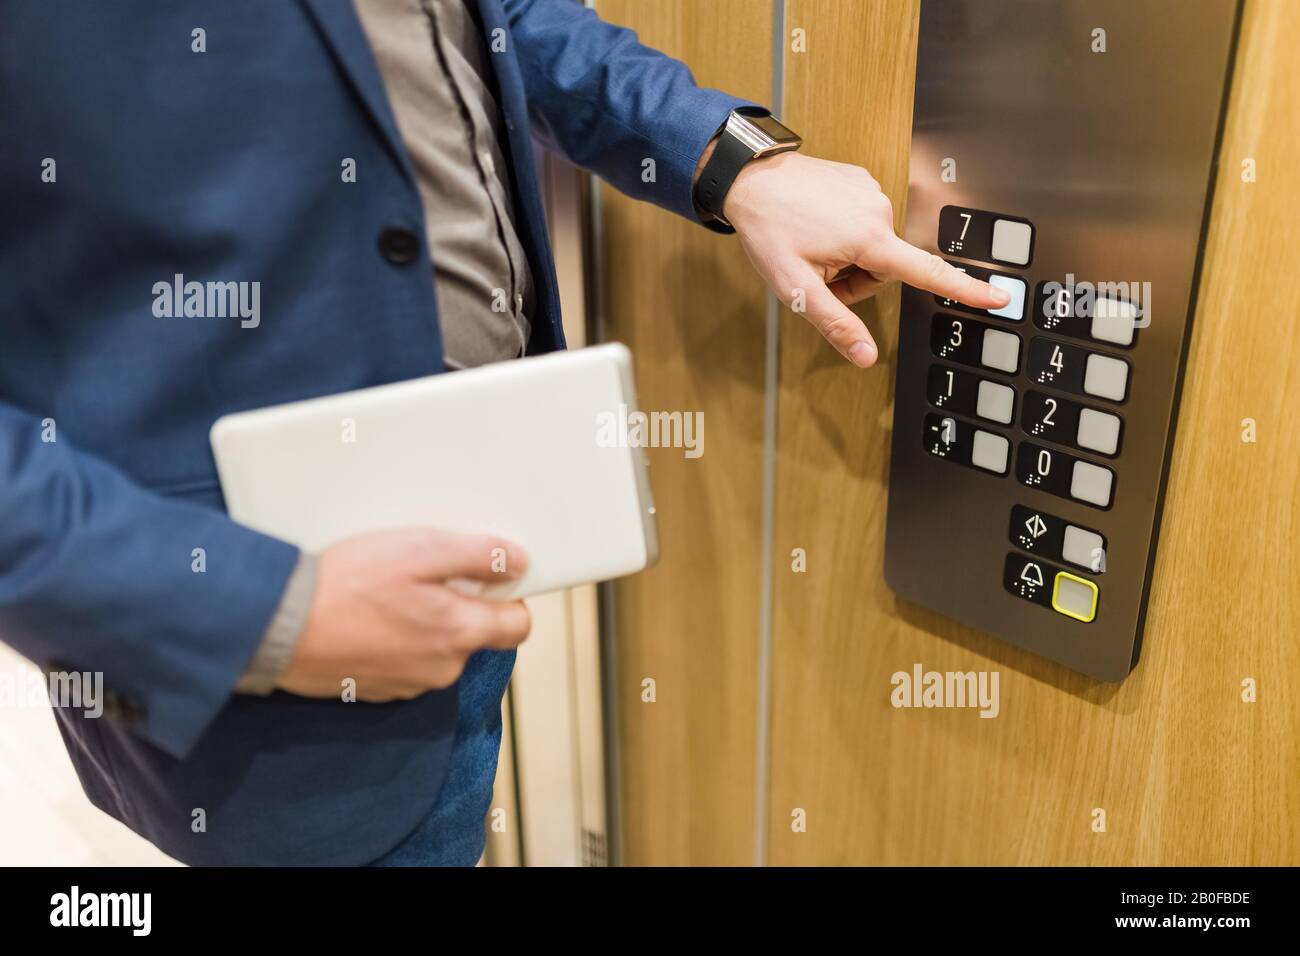 Man holding digital tablet while using elevator control panel. Stock Photo